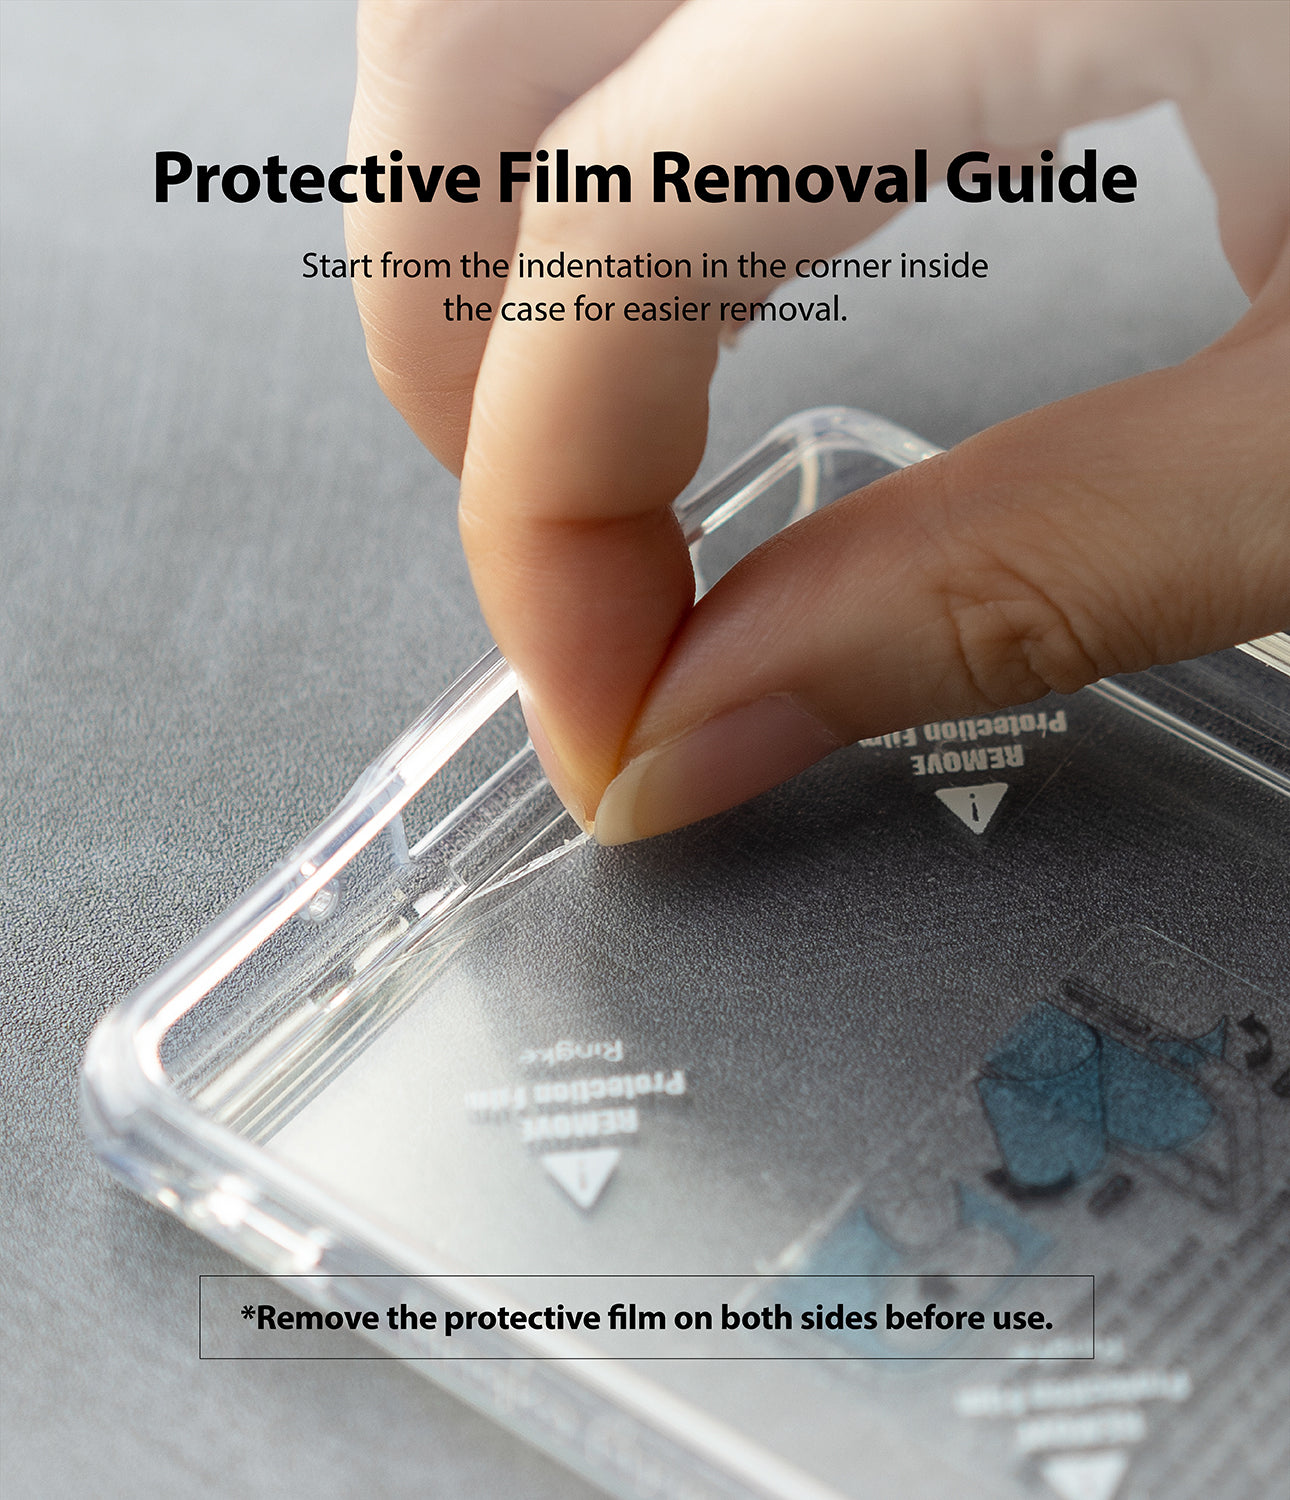 protective film removal - start from the indentation in the corner inside the case for easier removal